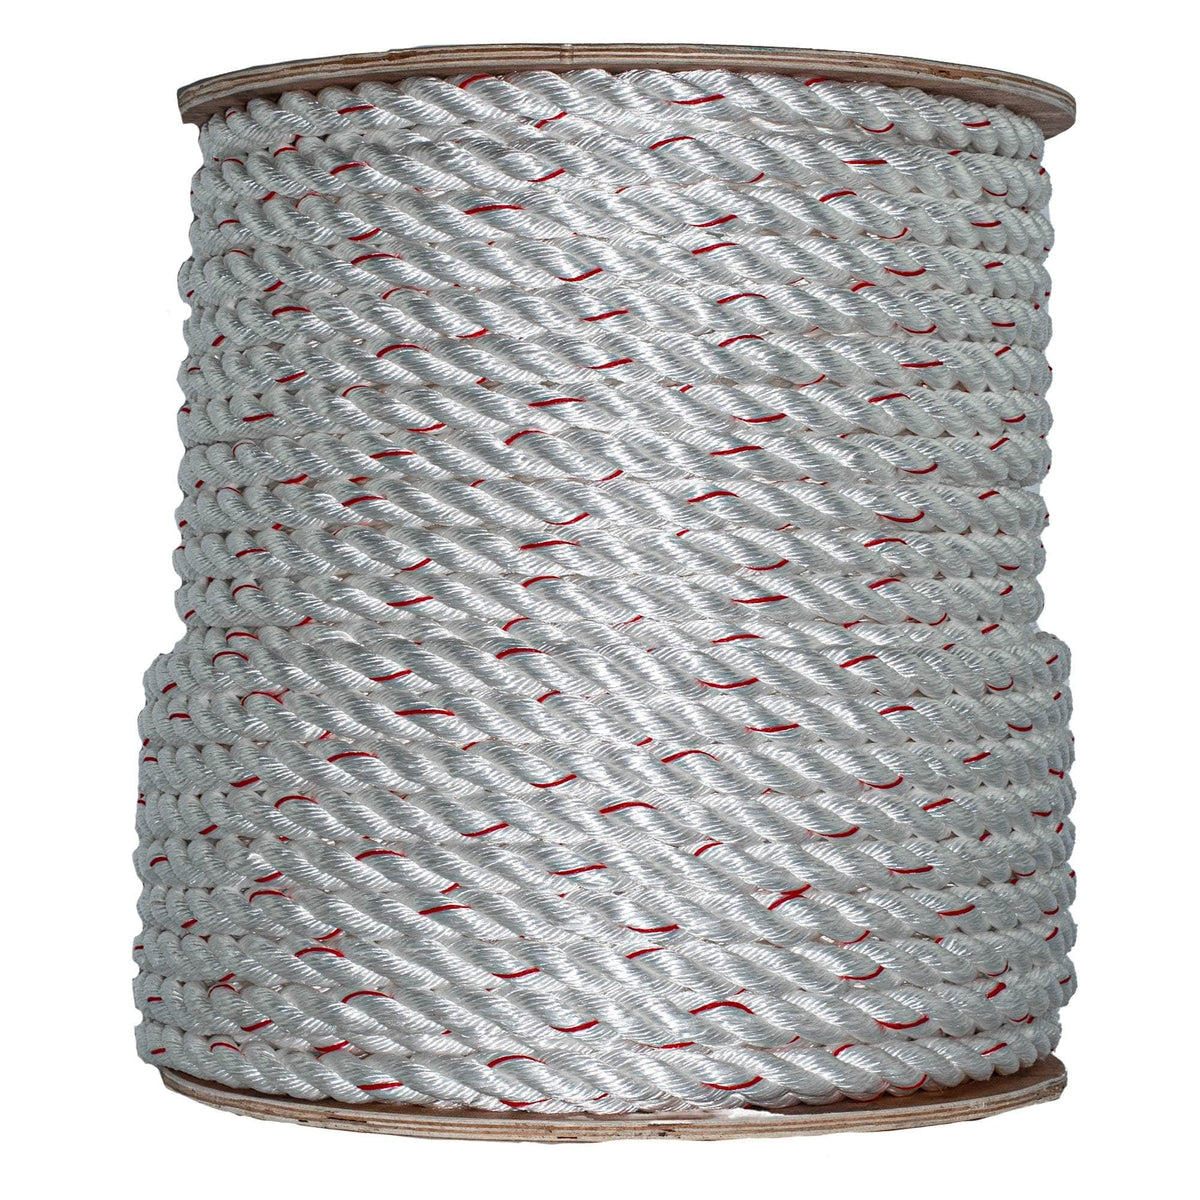 Twisted Poly Dacron Rope